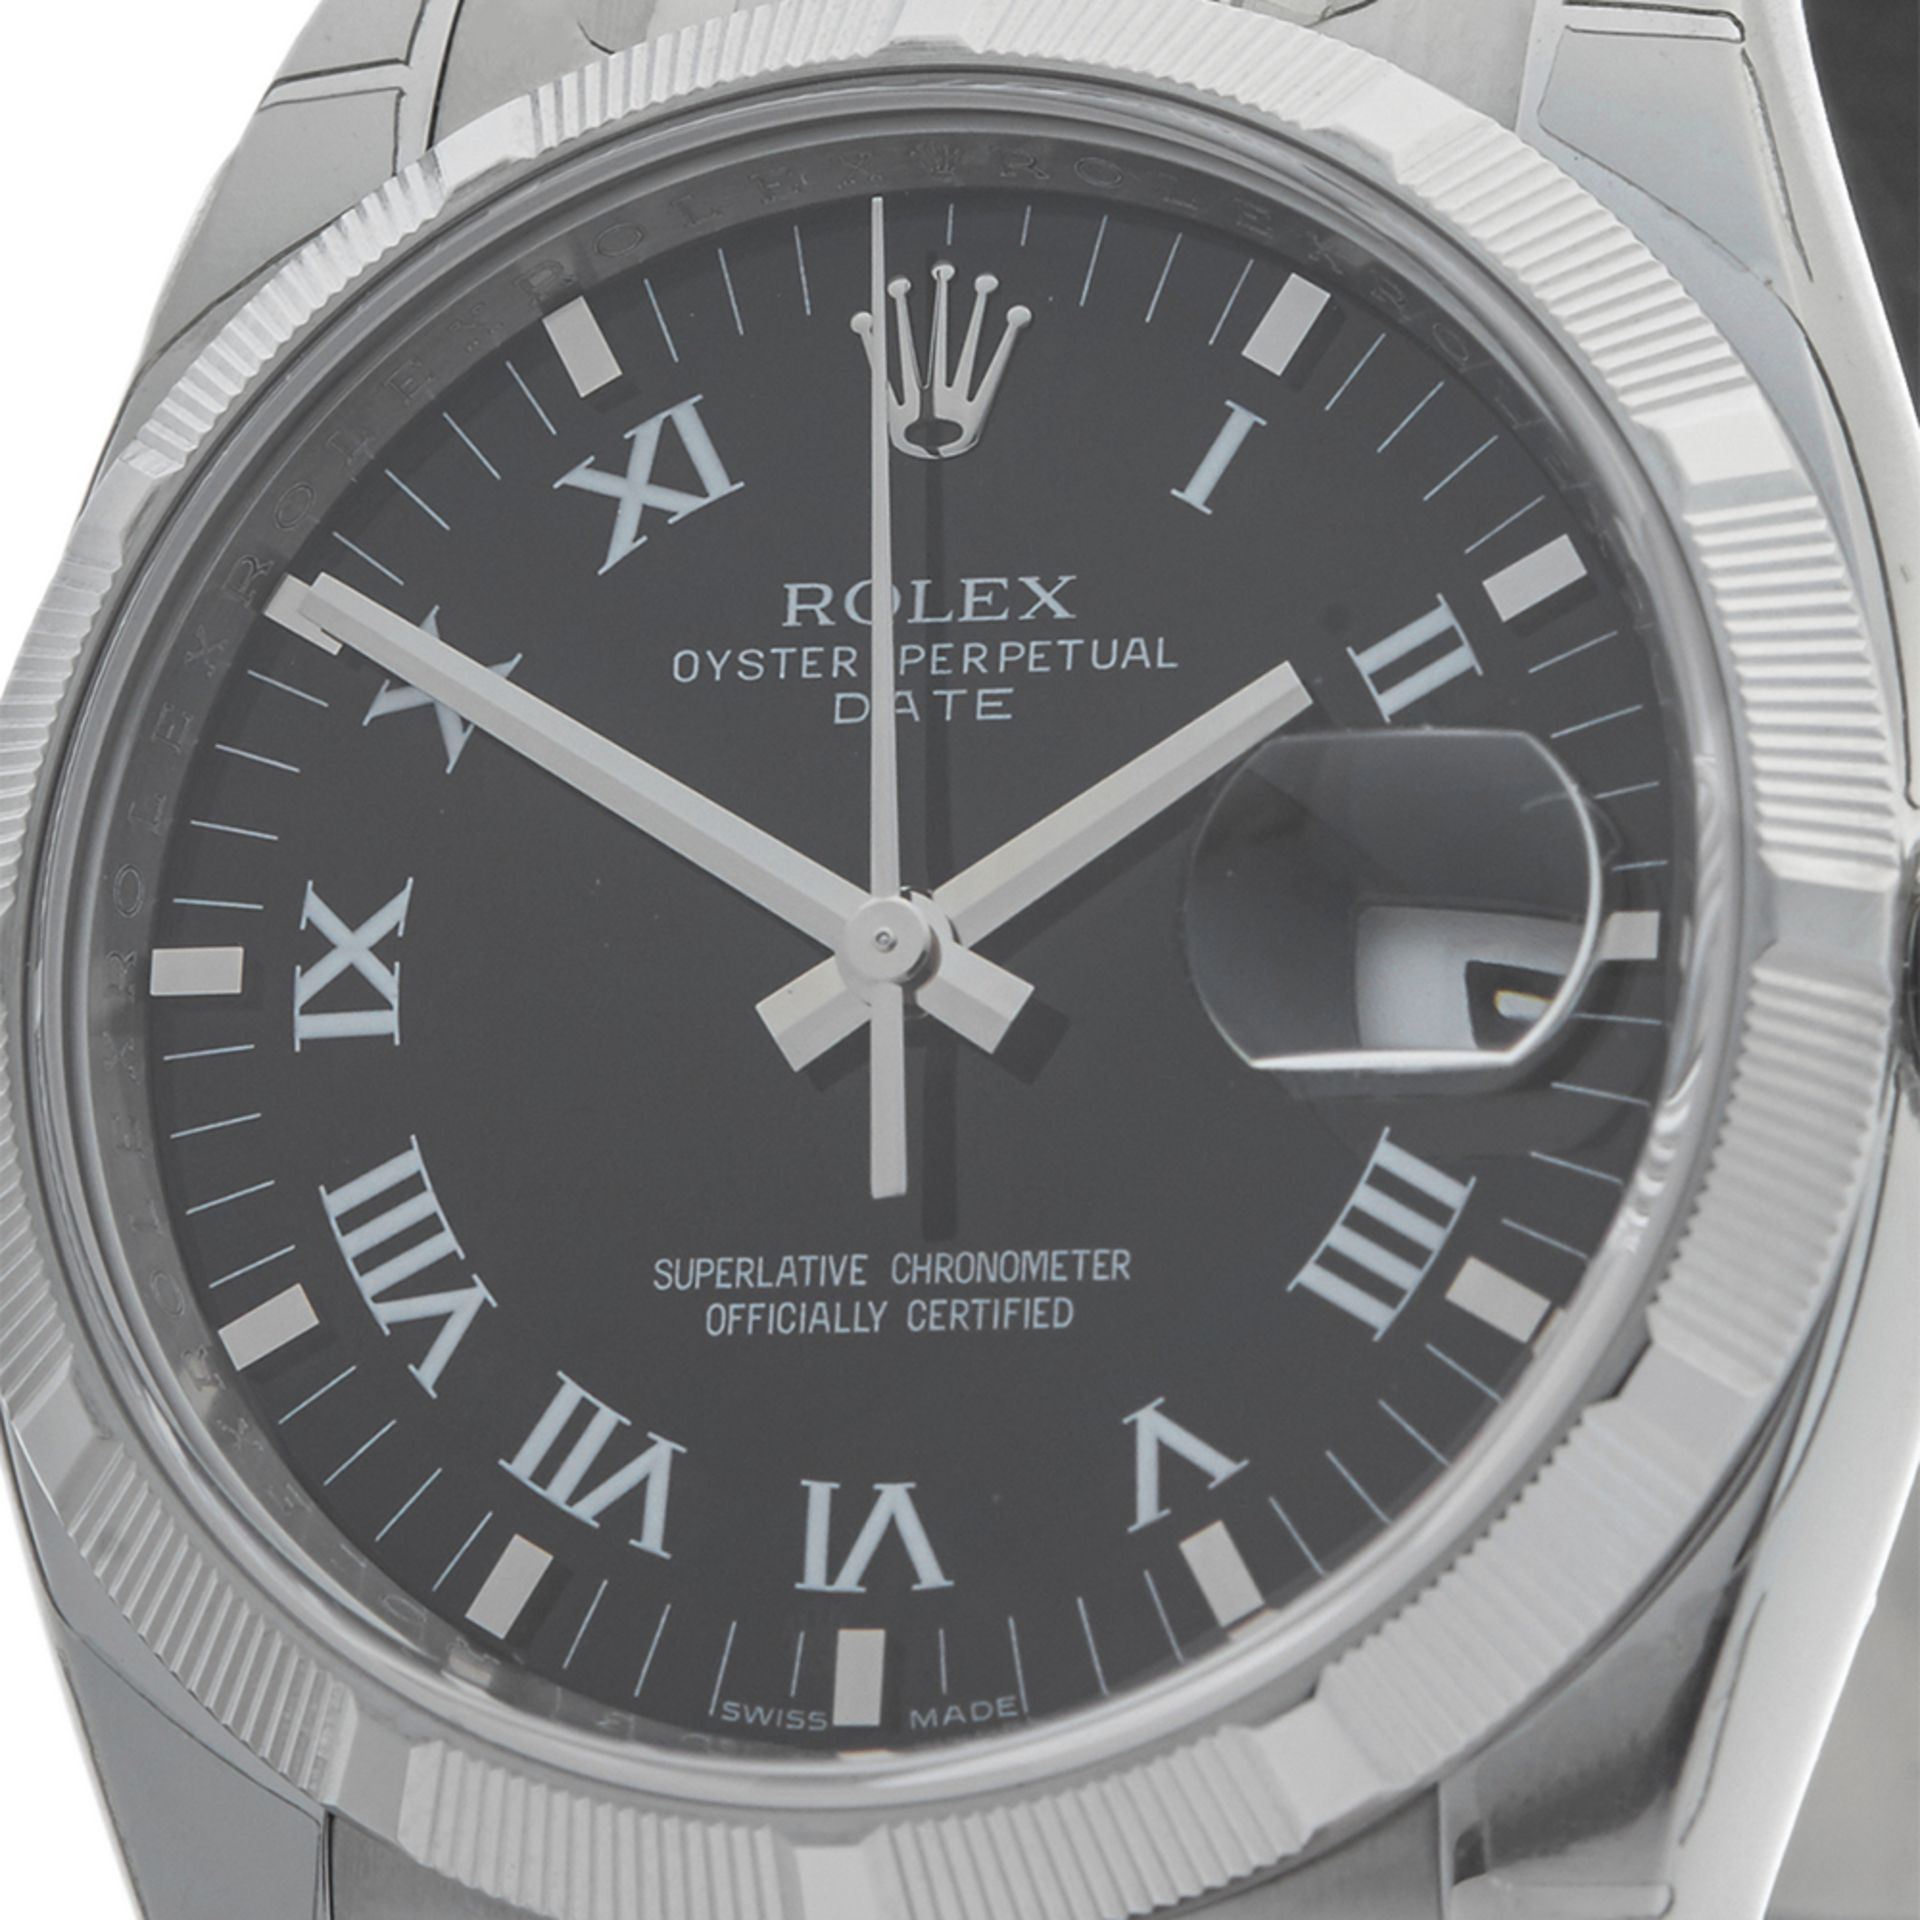 Rolex Oyster Perpetual Date Stainless Steel 115210 34mm